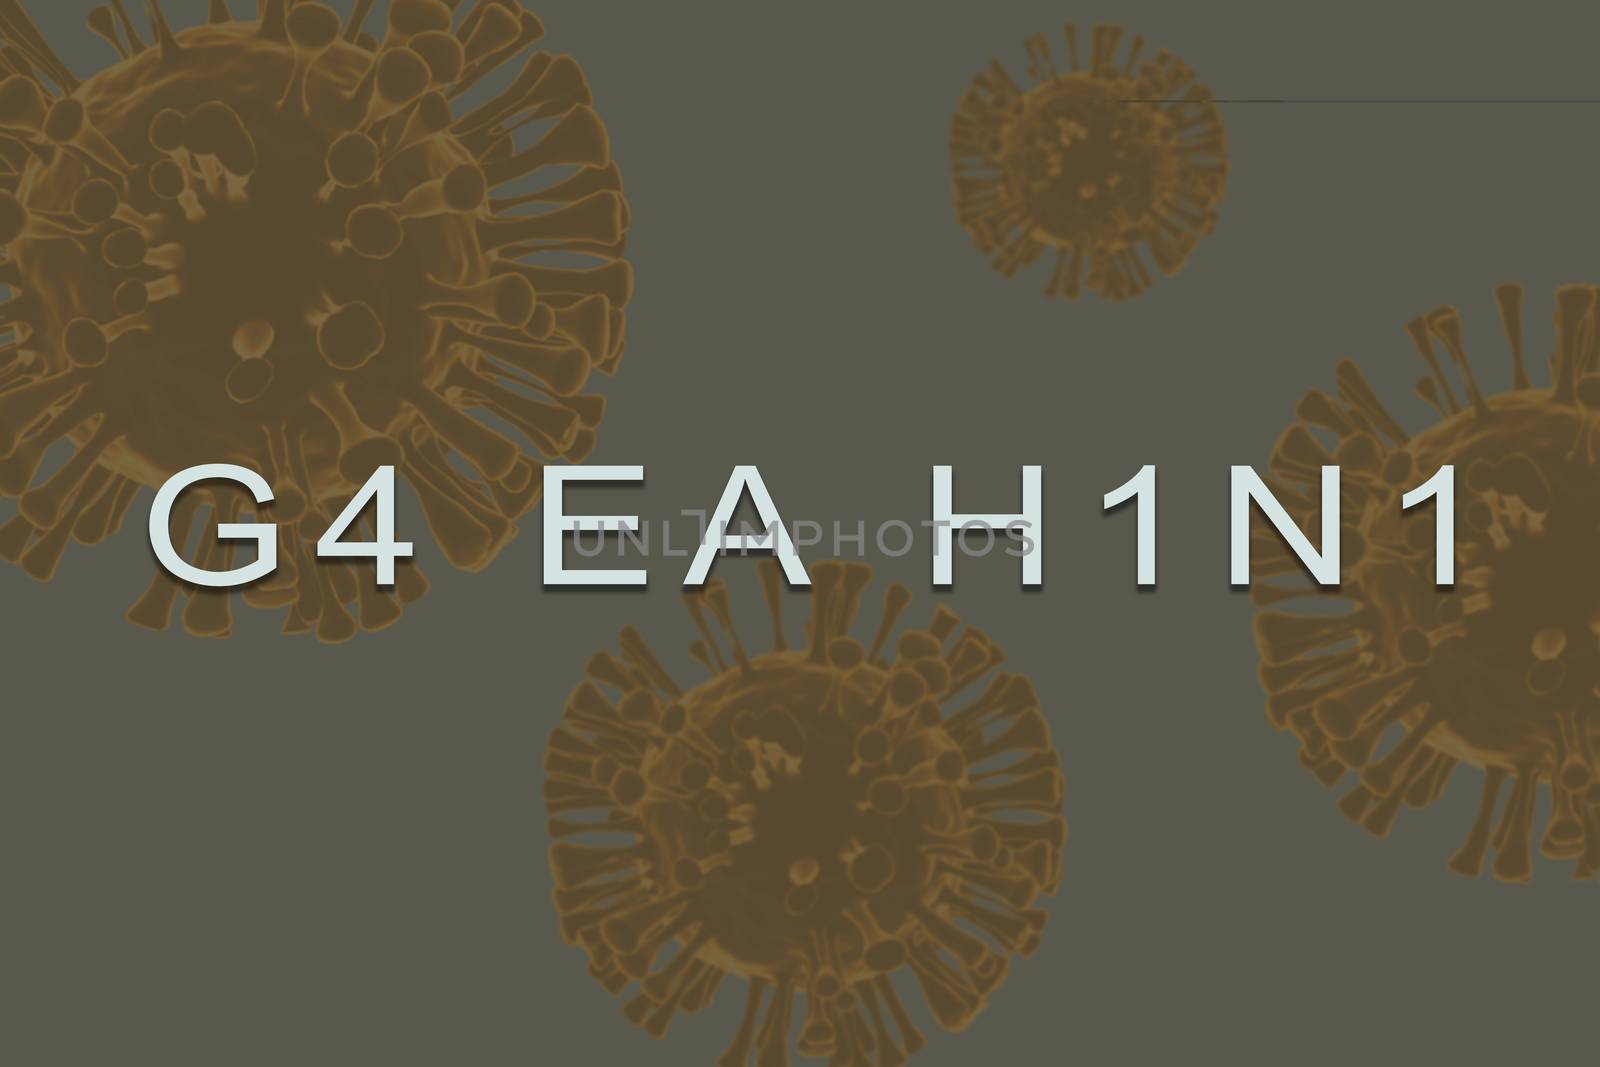 Inscription text of new virus called G4 EA H1N1 with 3d rendered virus as background by lakshmiprasad.maski@gmai.com